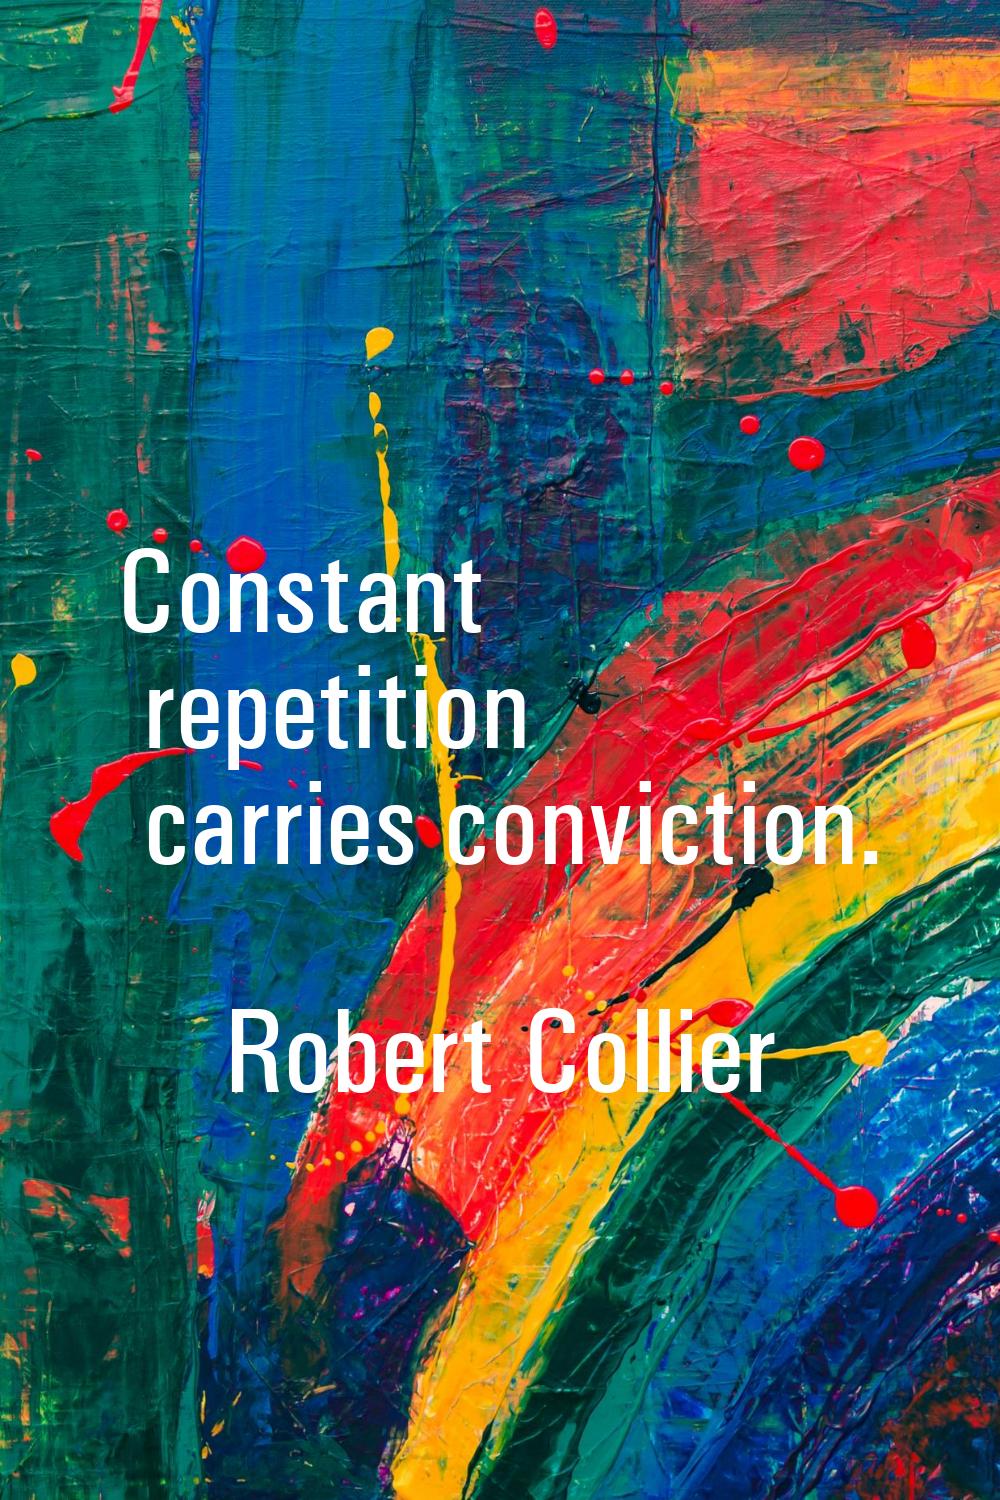 Constant repetition carries conviction.